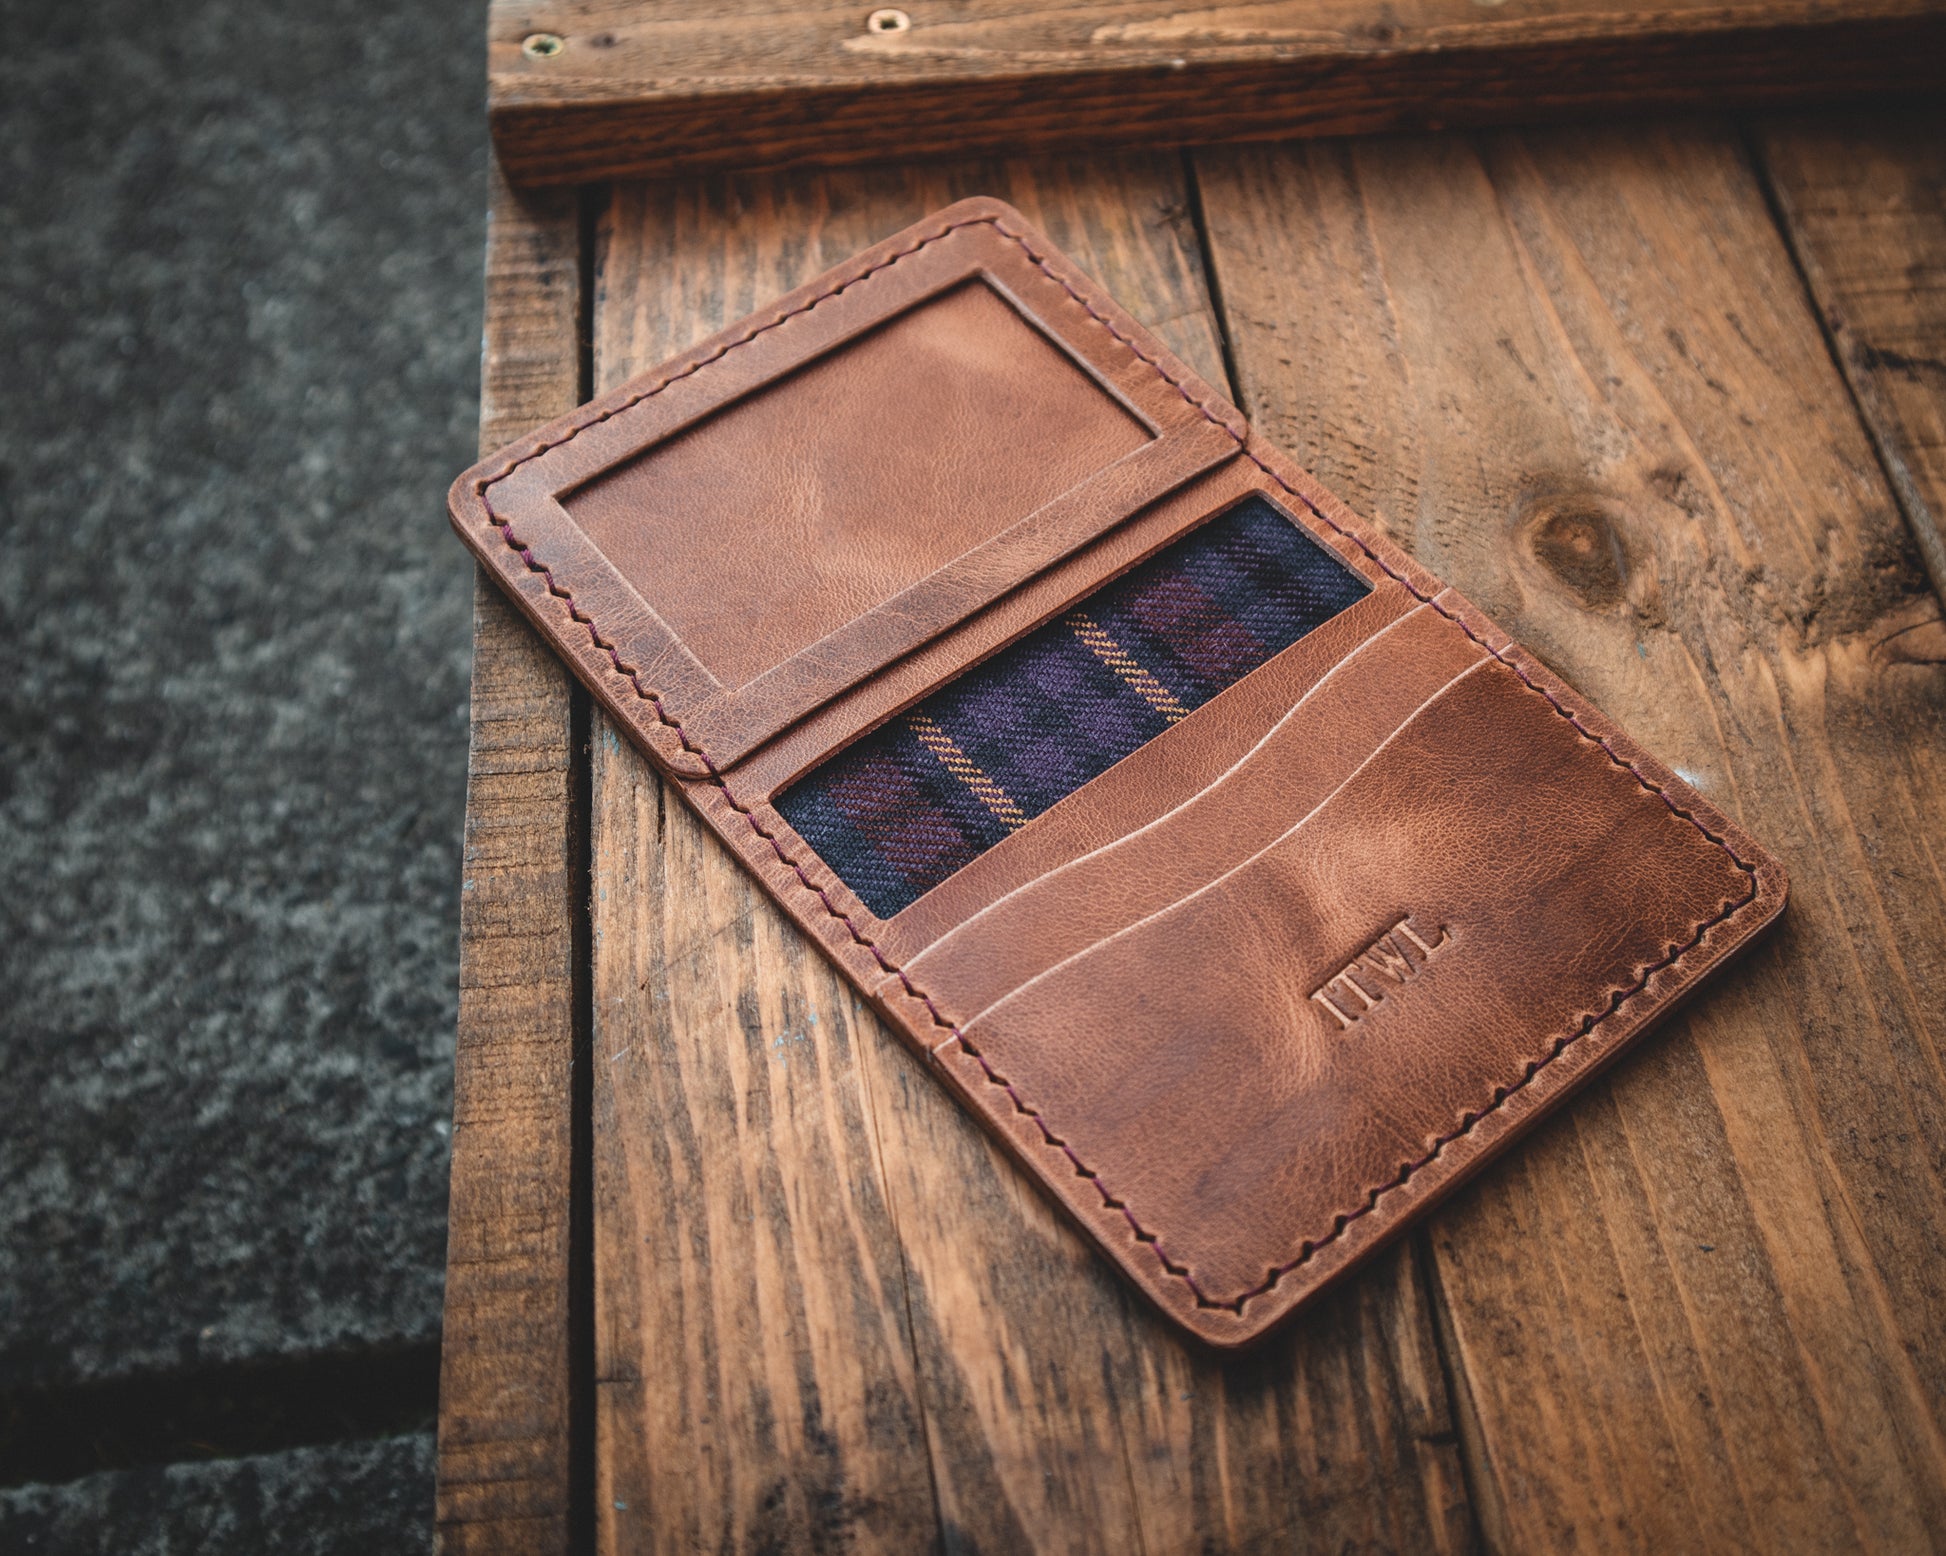 Handmade Men's Tartan Lined Italian Leather Wallet - Personalised | Hebridean Heather / ID Slot | Handcrafted in Scotland by Orraman Leather